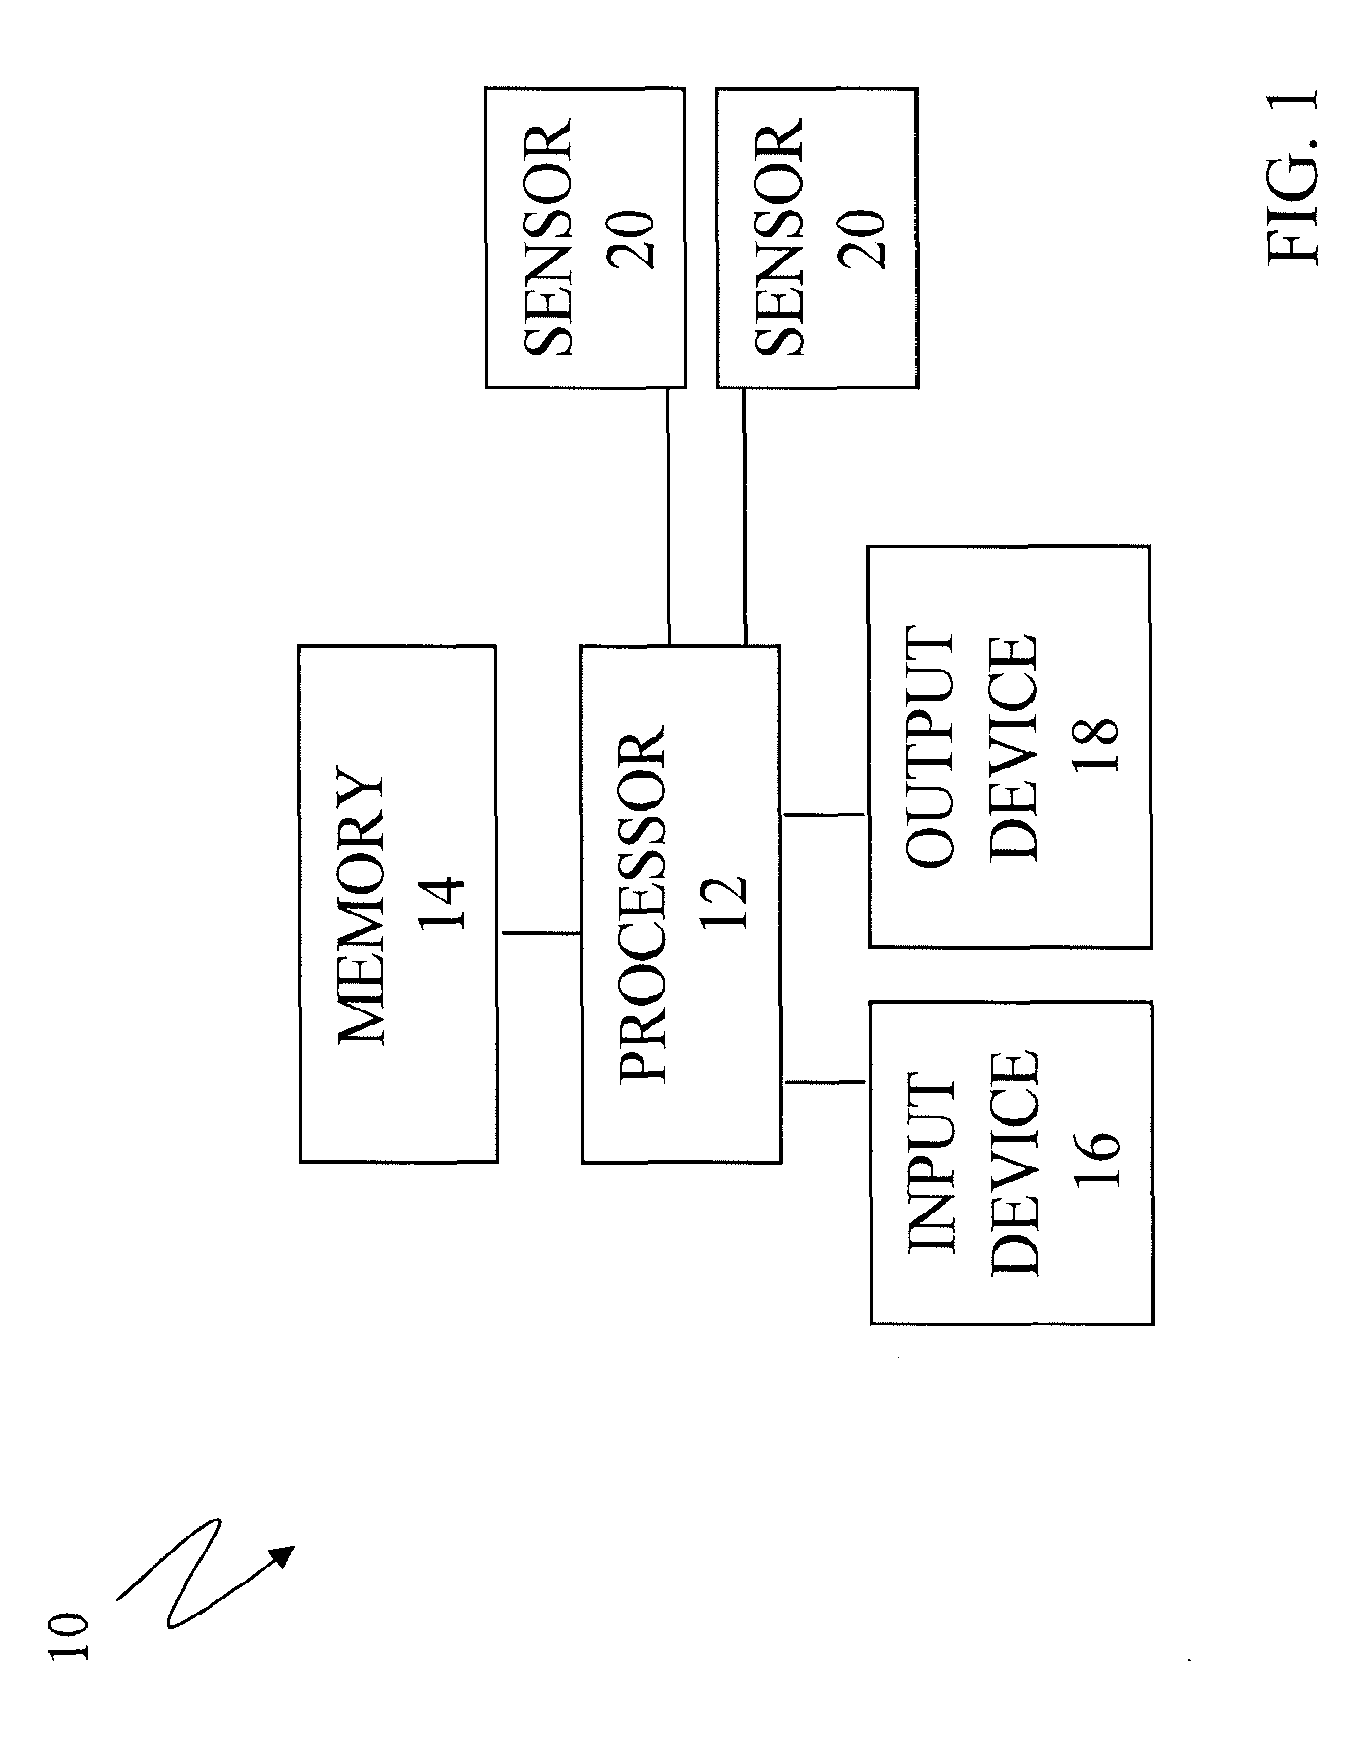 Methods and apparatuses for monitoring energy consumption and related operations